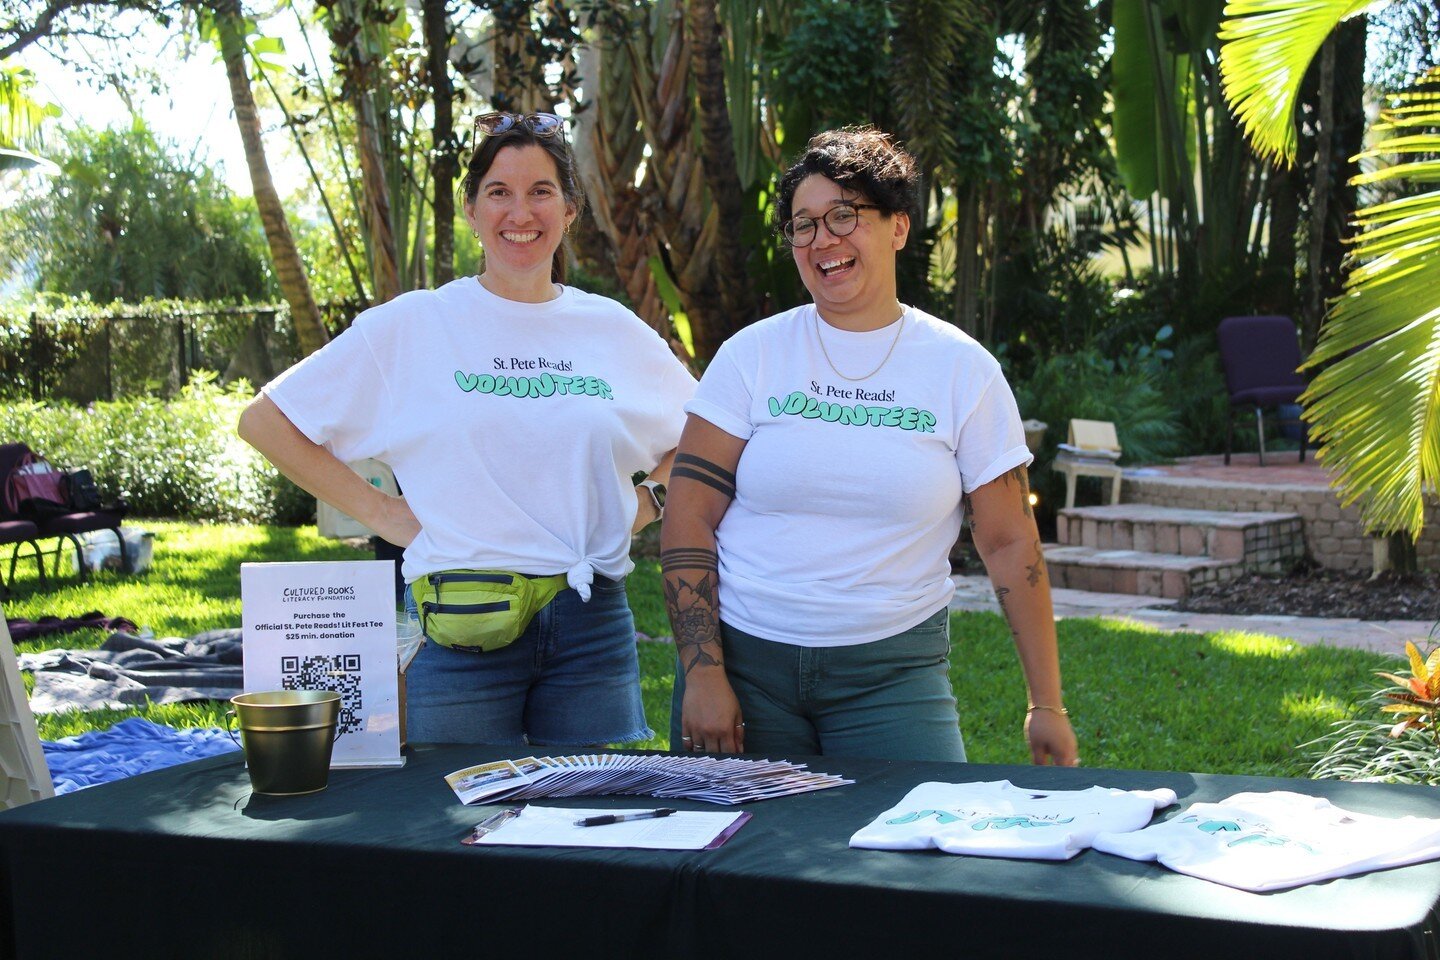 ATTENTION ALL VOLUNTEERS!
 
We are excited to announce that registration is now open for St. Pete Reads! Lit Fest.

Youth groups, local businesses, and individuals are welcome to sign up to join the volunteer crew on Saturday, November 4th. 

We are 